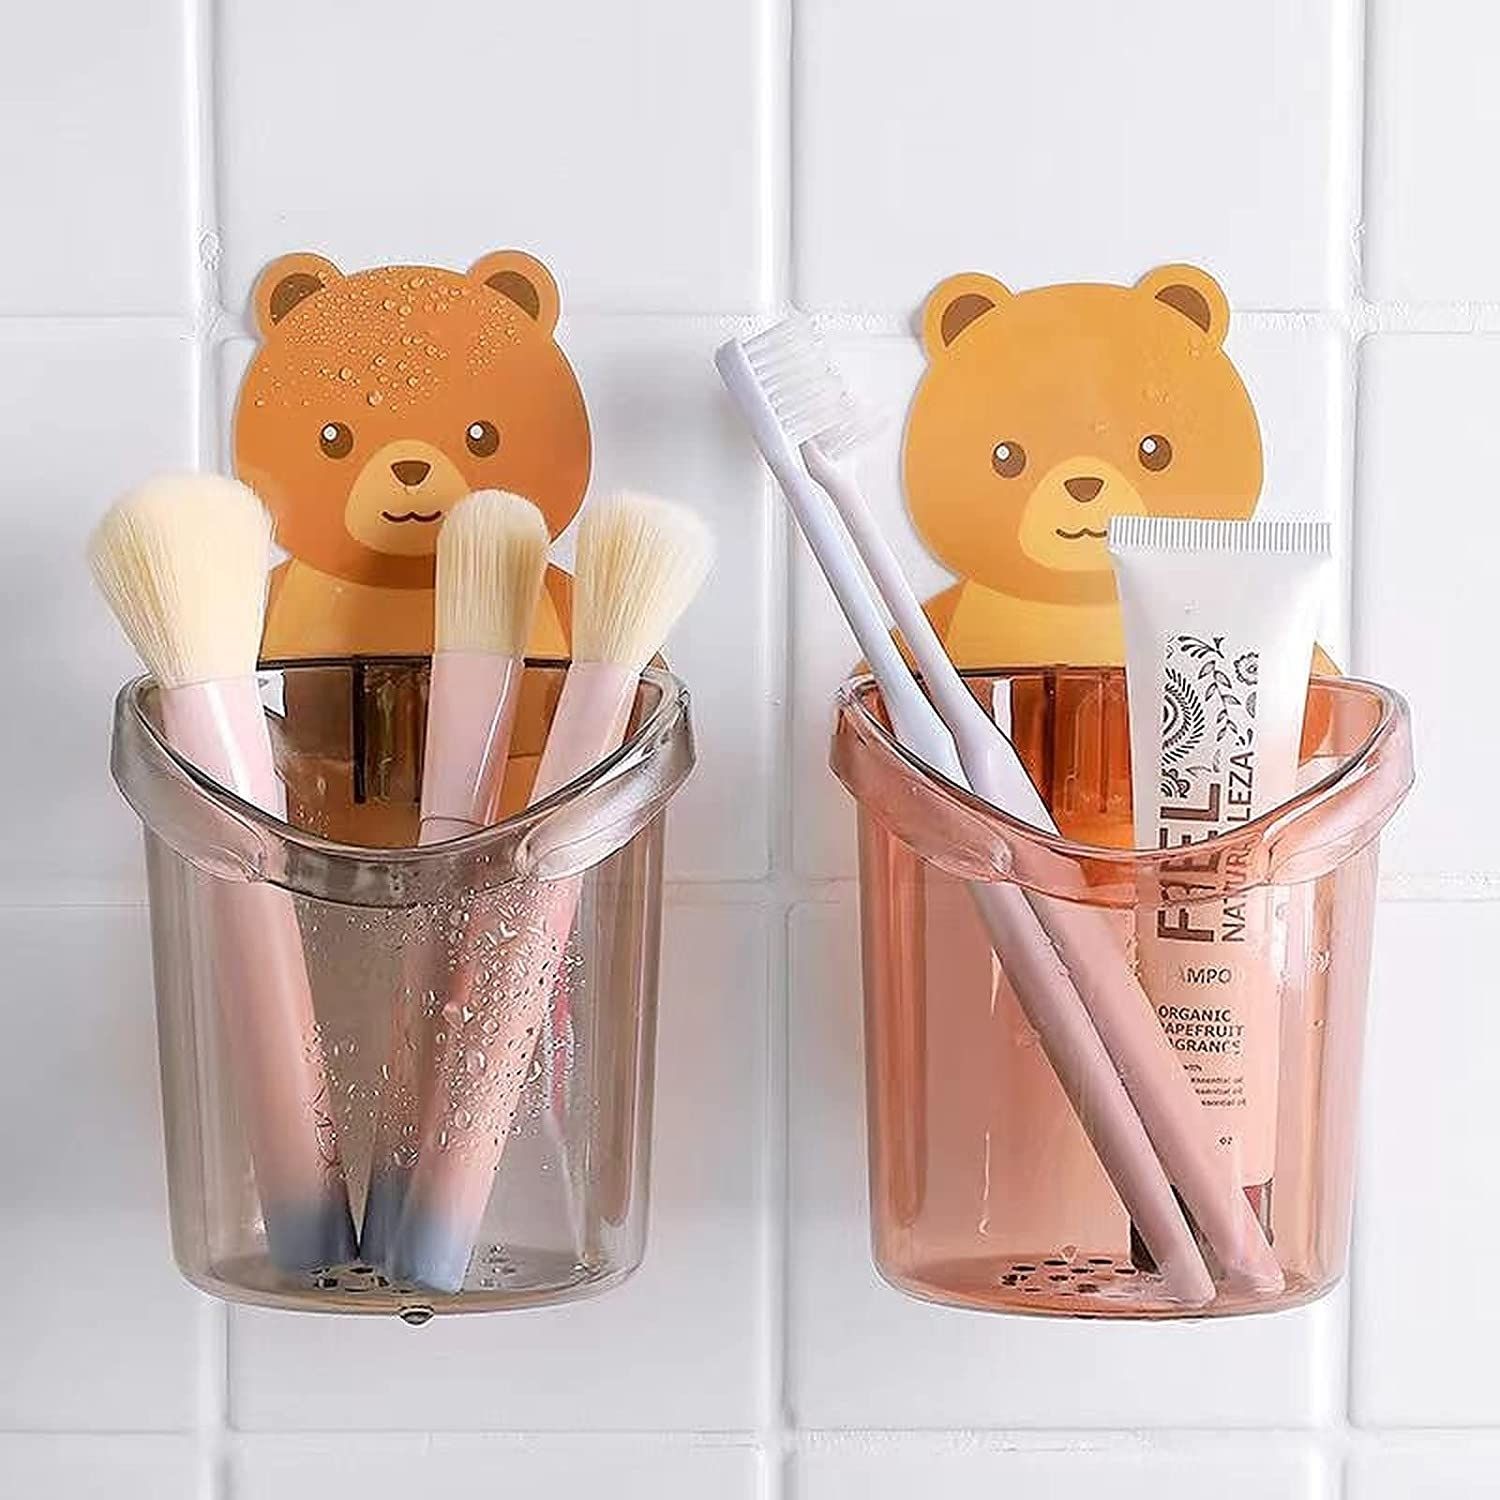 Wolpin Toothbrush Holder (Set of 2 Pcs) Plastic Stand for Toothpaste, Comb, Brush, Cream, Lotion Kids Bathroom Cup Drain Waterproof Self-Adhesive, Teddy Bear